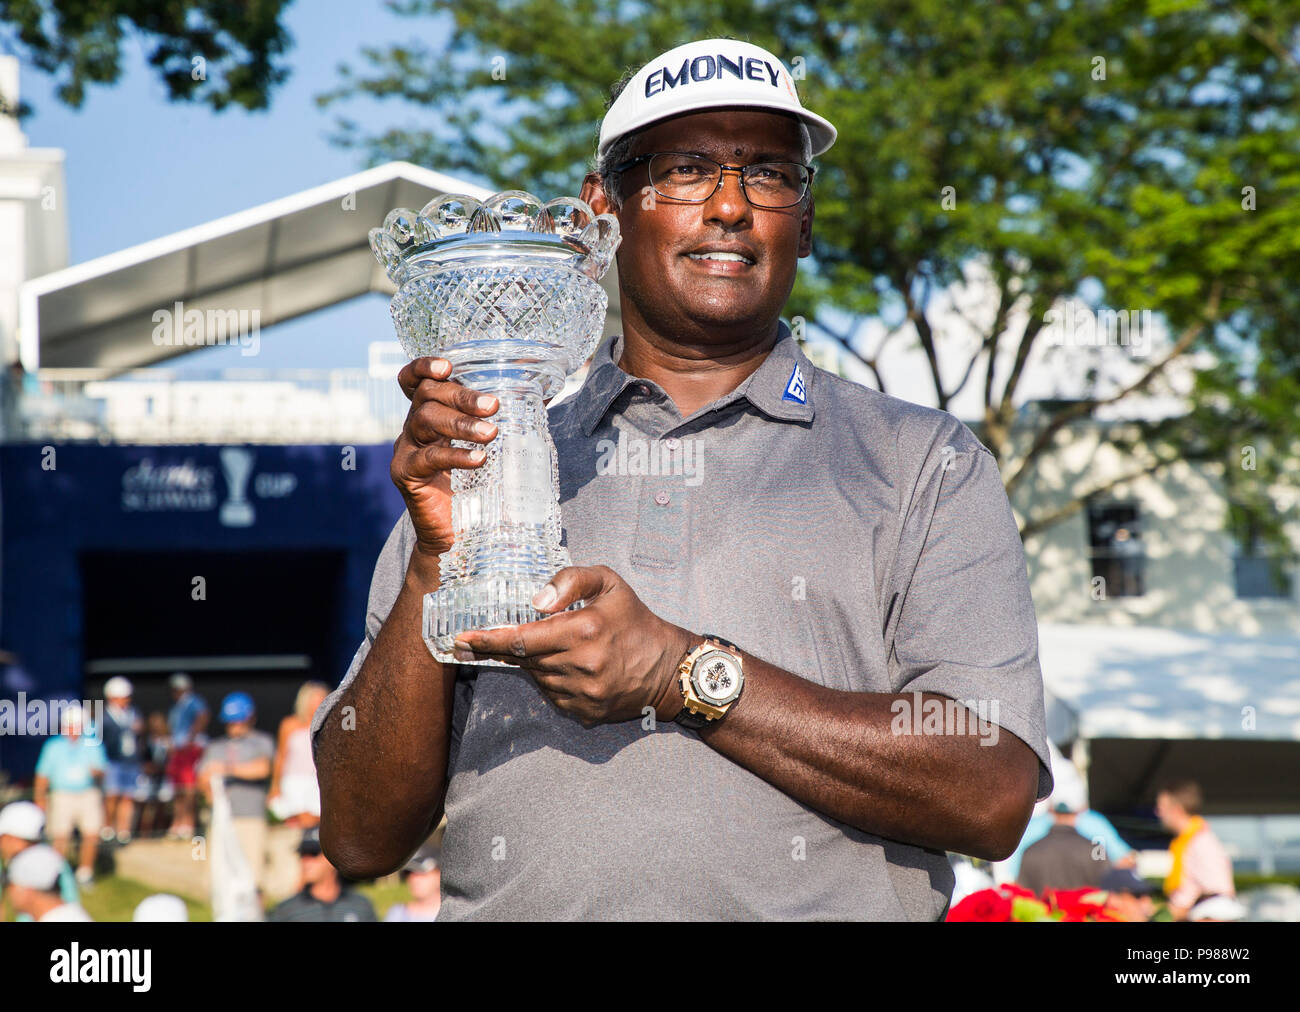 Chicago, USA. 15th July, 2018. Vijay Singh of the Fiji Islands shows his trophy after the final round of the Constellation Seniors Players Championships at Exmoor Country Club on the PGA Champions Tour in Highland Park, Chicago, the United States, on July 15, 2018. Credit: Joel Lerner/Xinhua/Alamy Live News Stock Photo